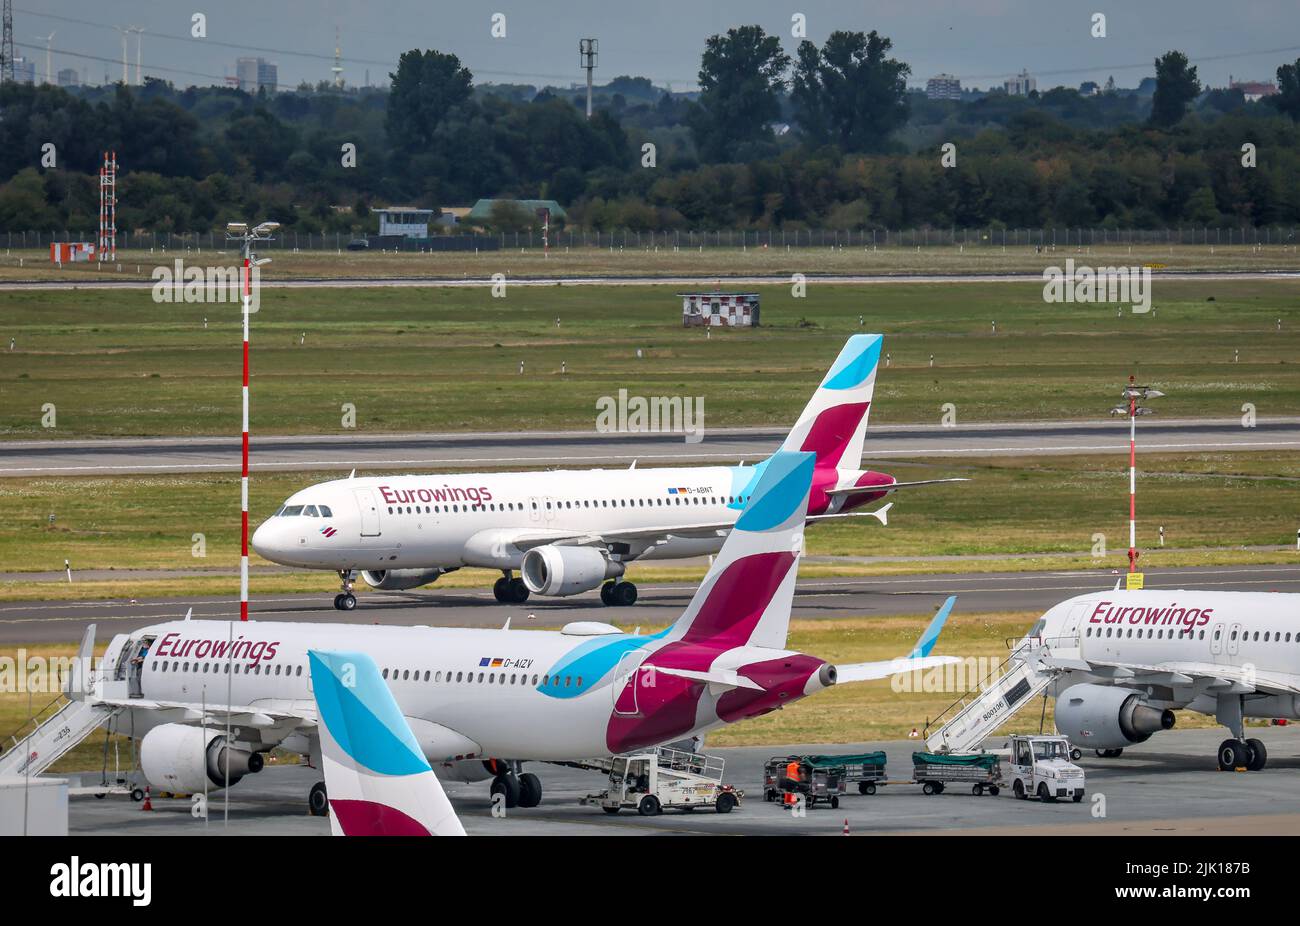 Duesseldorf, North Rhine-Westphalia, Germany - Duesseldorf Airport, aircraft of the airline Eurowings in parking position on the day of the warning st Stock Photo